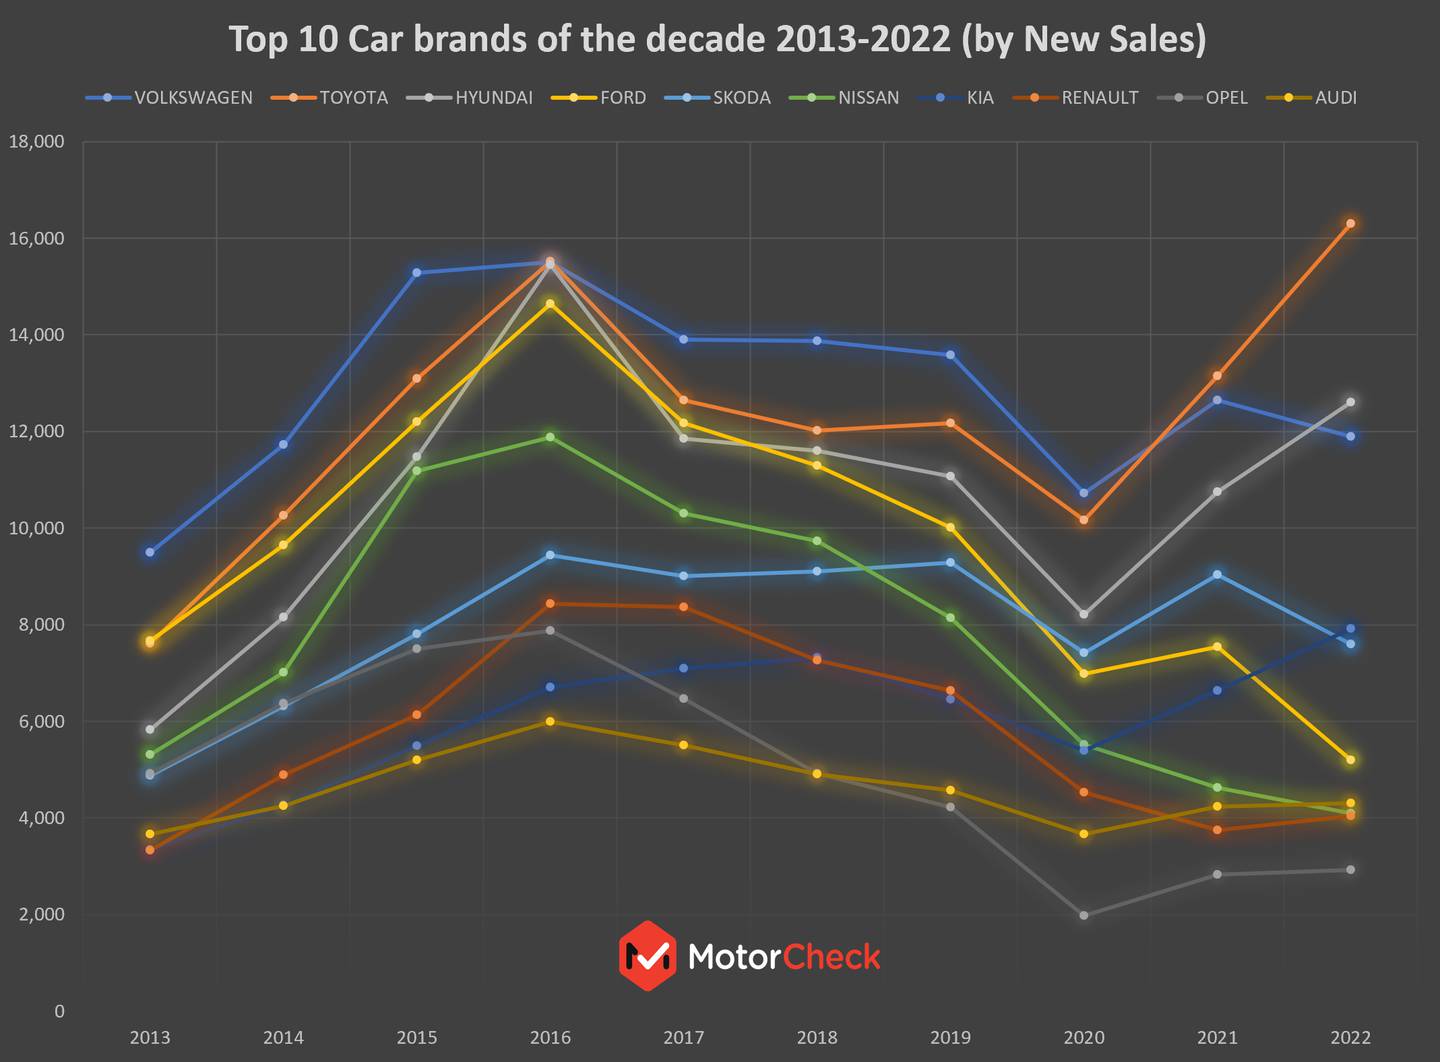 New car sales data for the decade